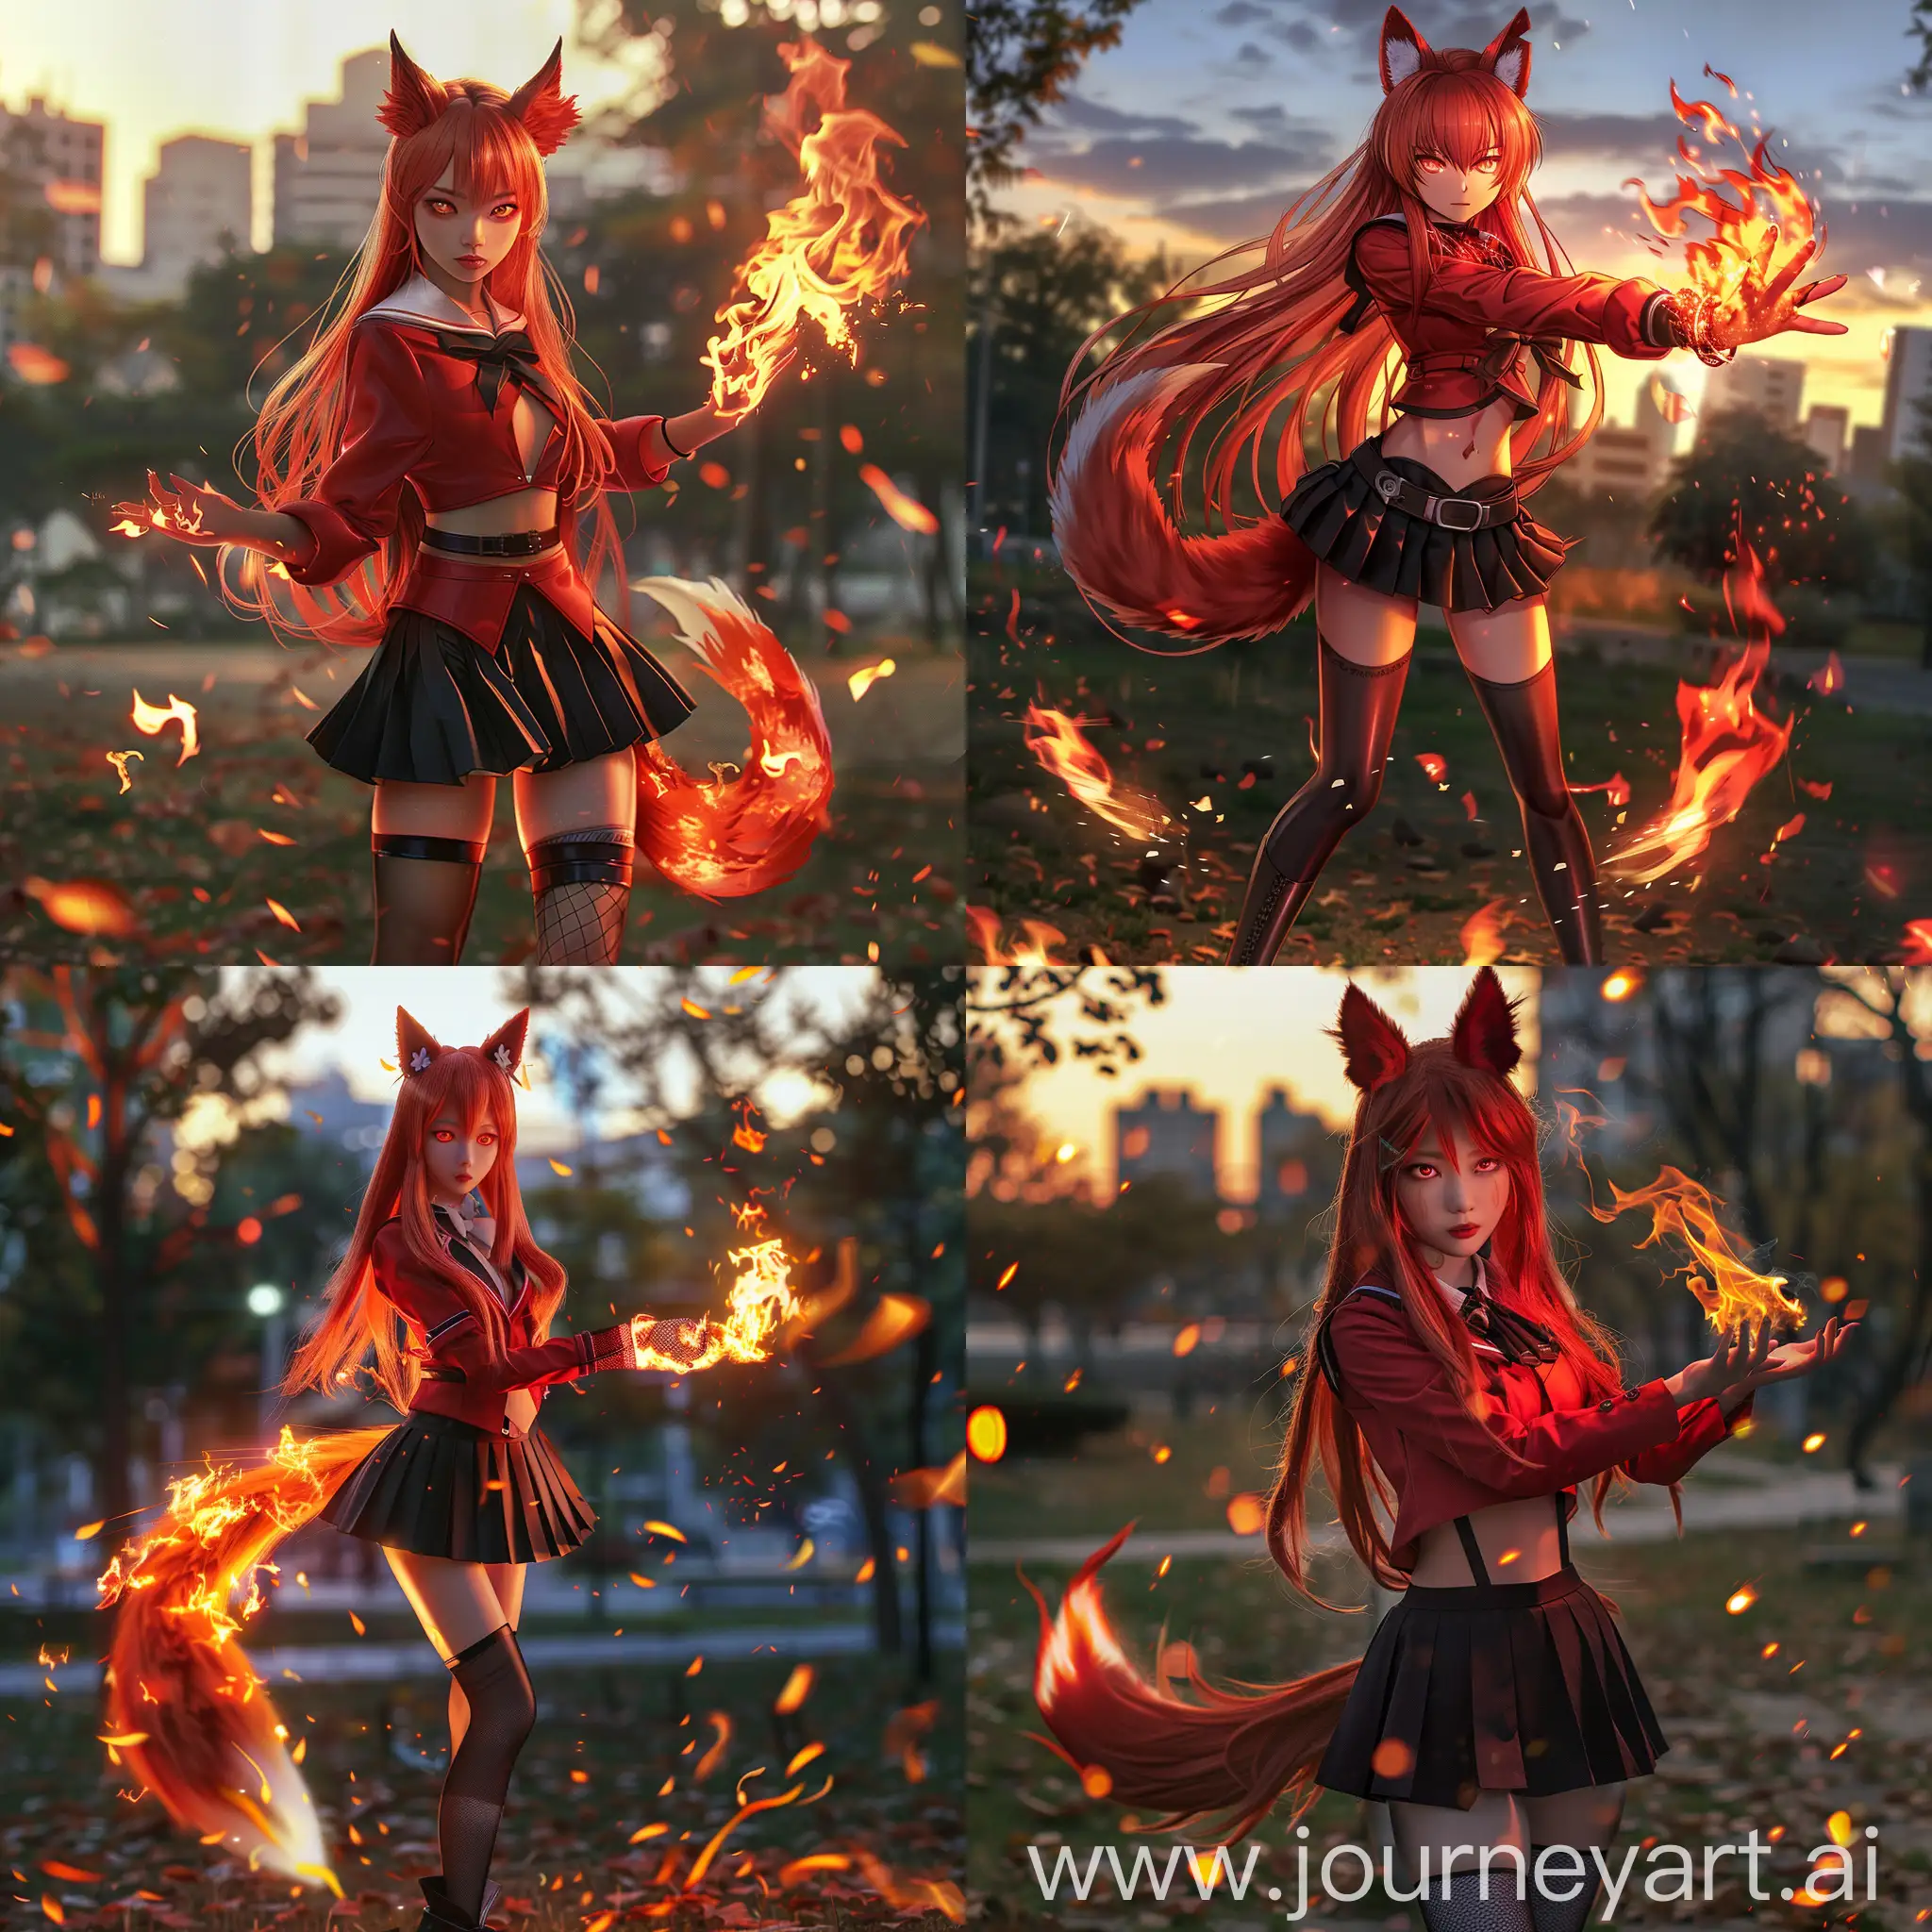 anime-style, full body, athletic, beautiful, tan skin, asian woman, long fiery red hair, red fox ears, red fox tail attached to her waist, fiery red eyes, wearing a red school uniform, black pleated skirt, black leather shoes, black stockings, casting fire magic, hands wrapped in fire, good anatomy, dynamic, embers falling in foreground, city park, sunset